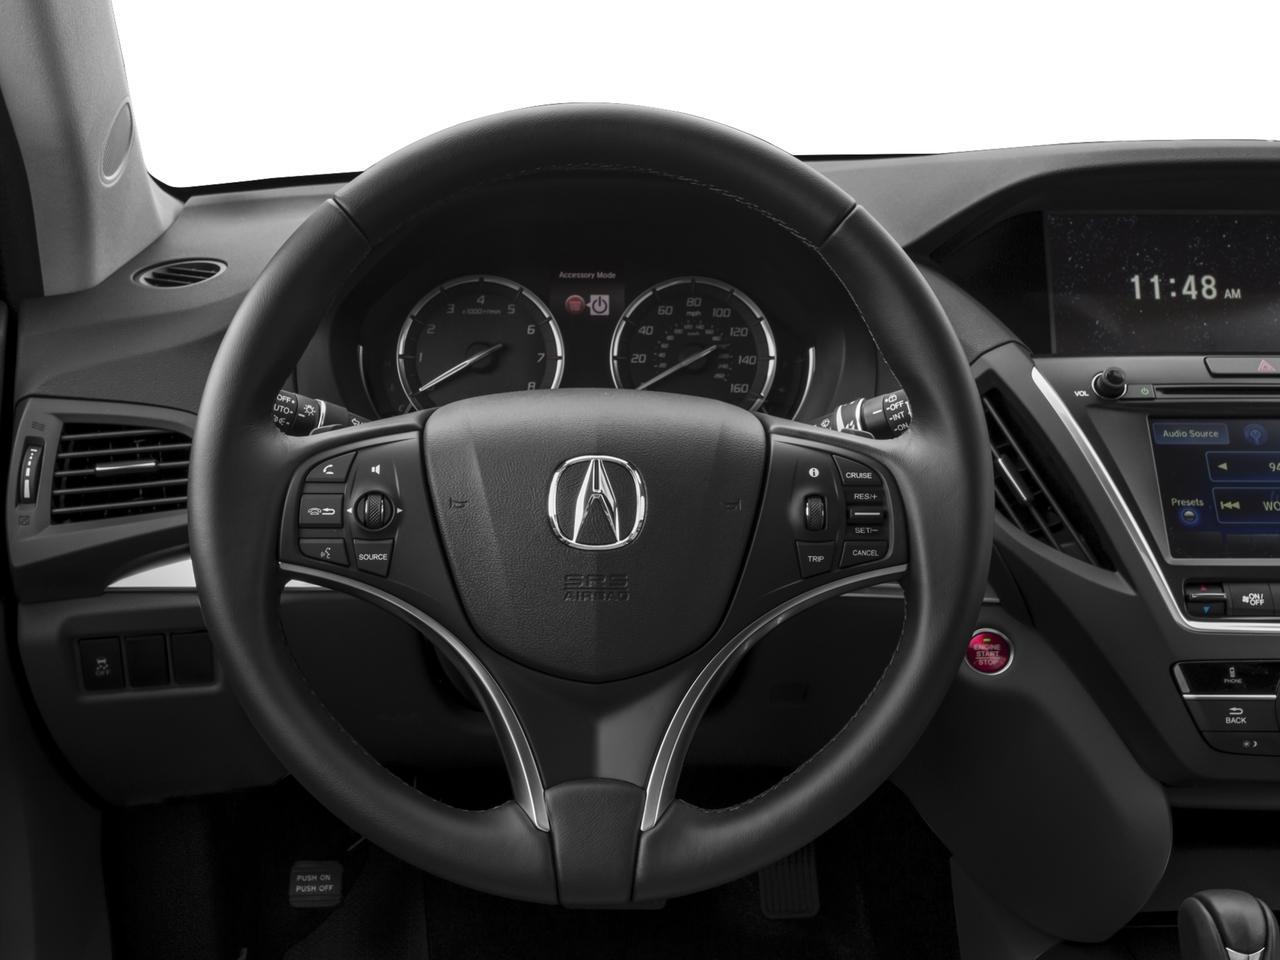 2015 Acura MDX Vehicle Photo in Grapevine, TX 76051